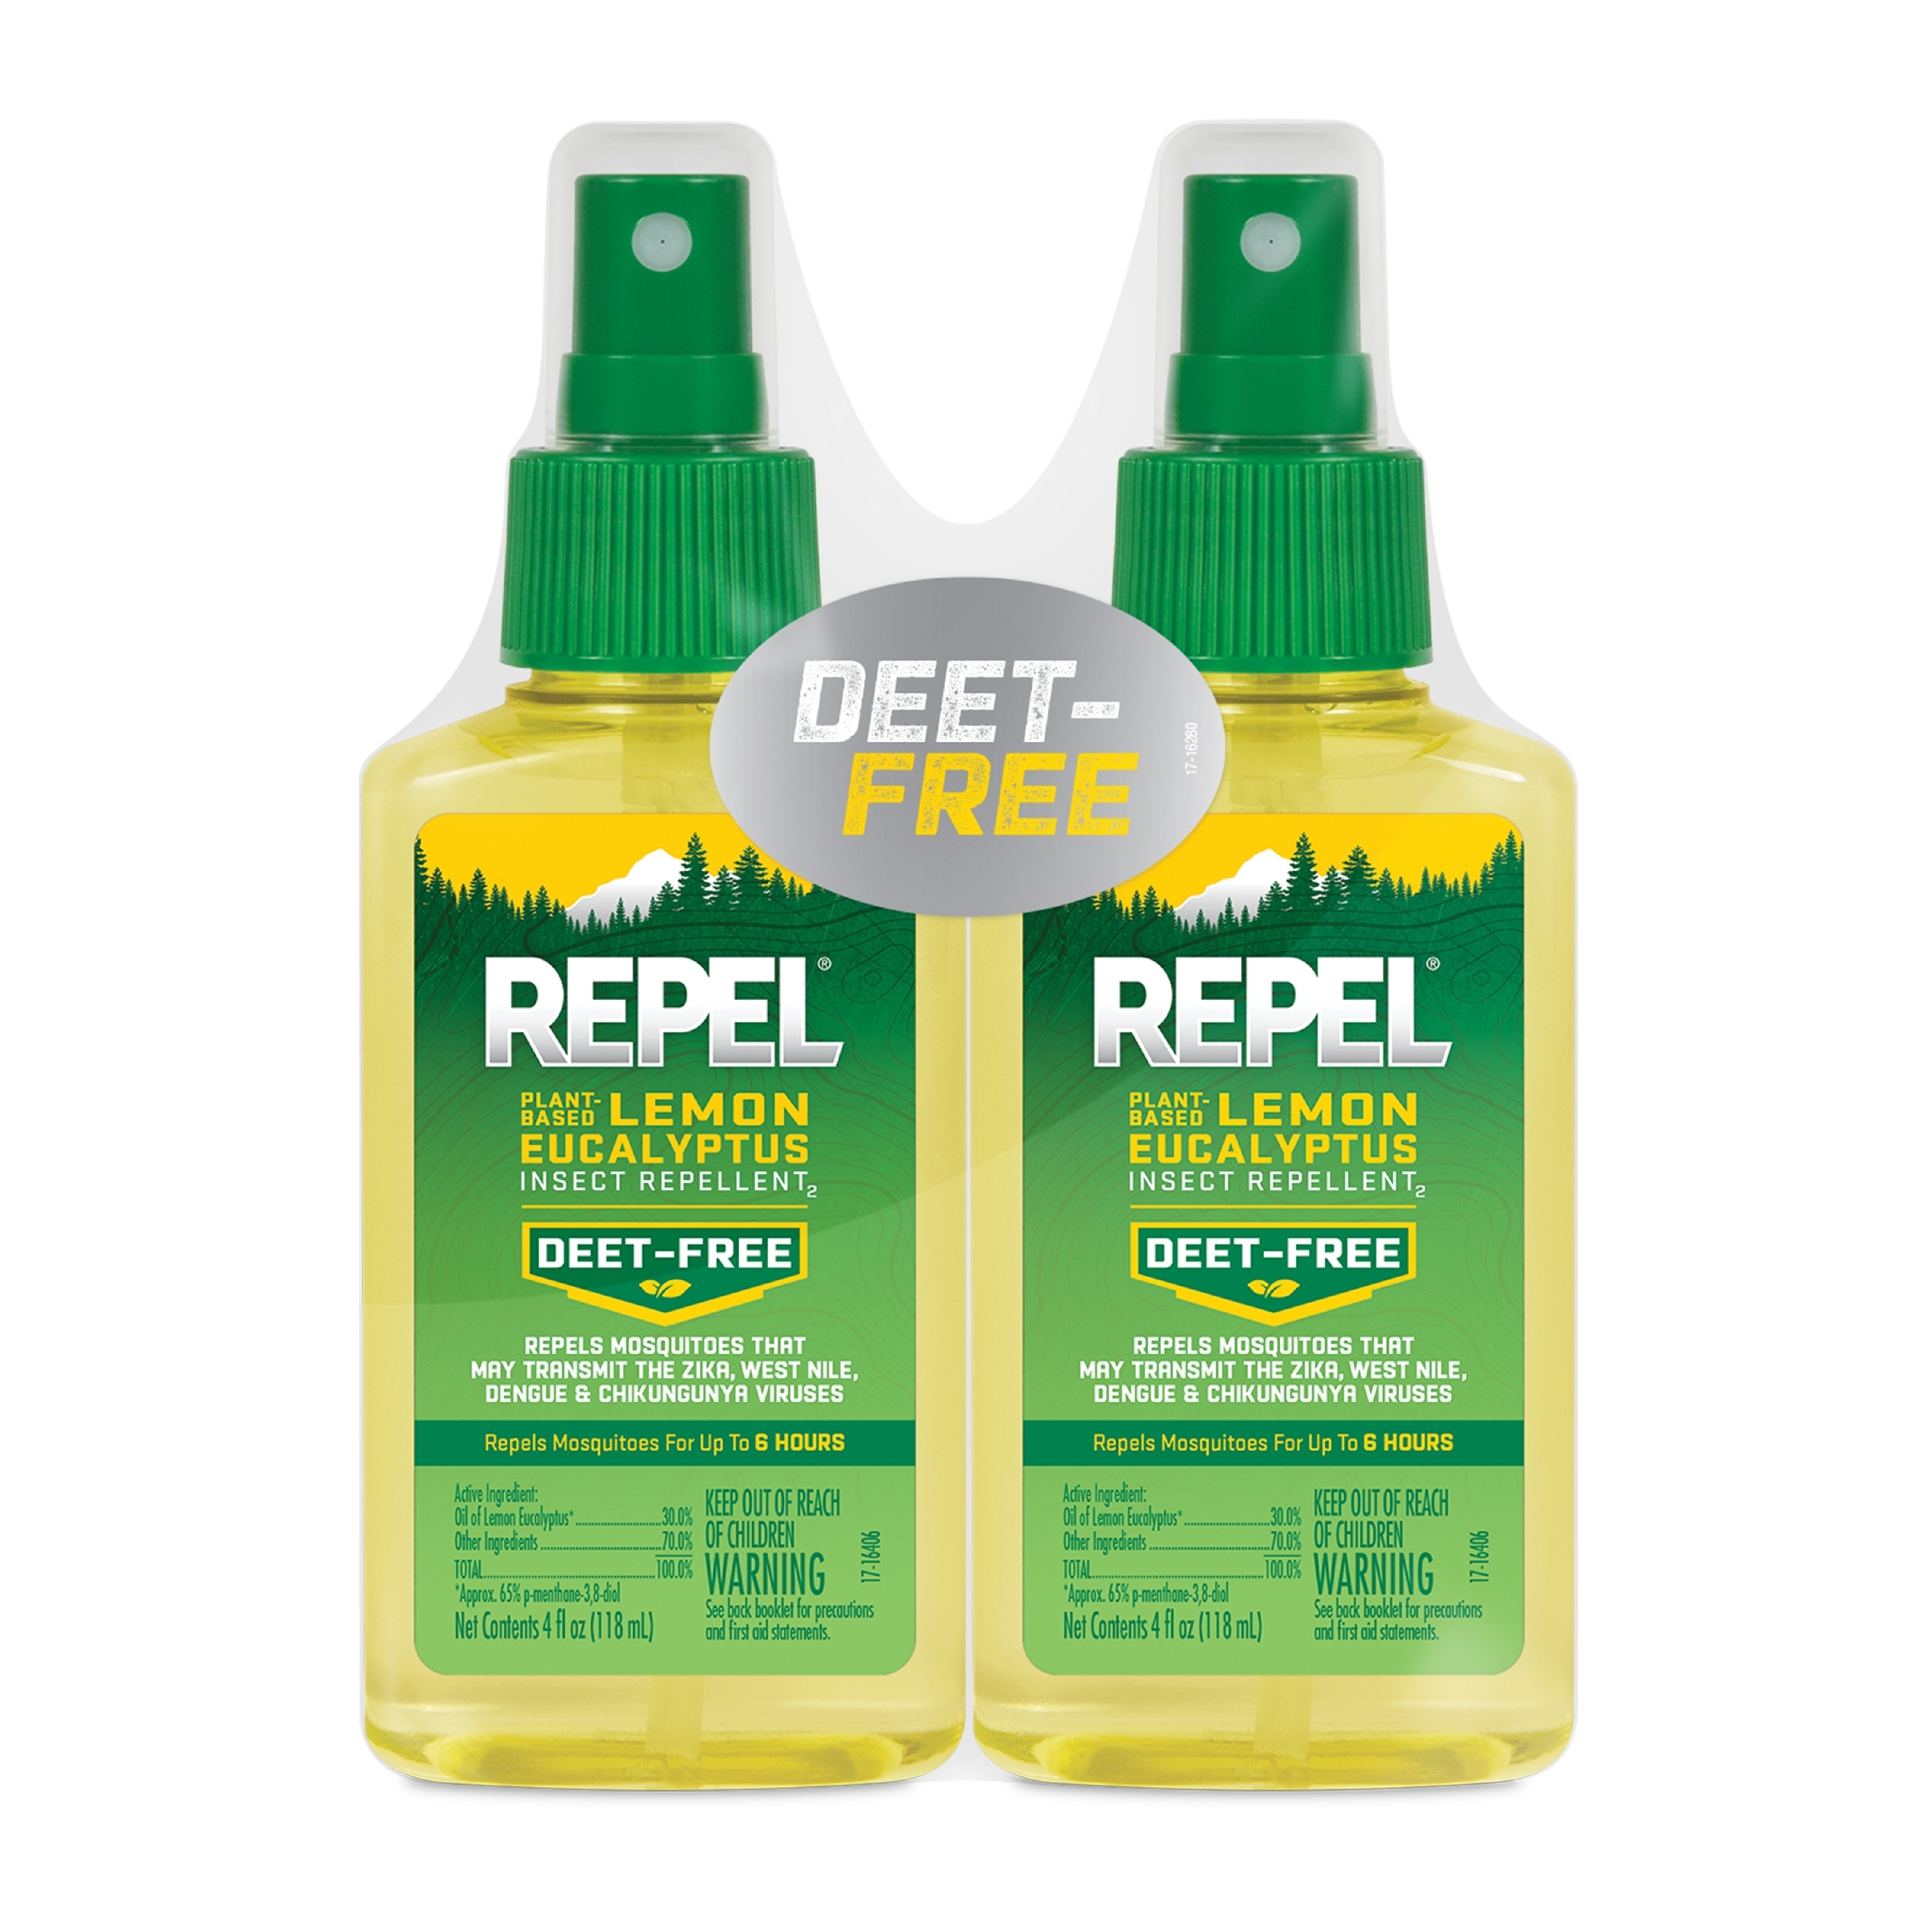 First new insect repellent approved in 11 years smells like grapefruit